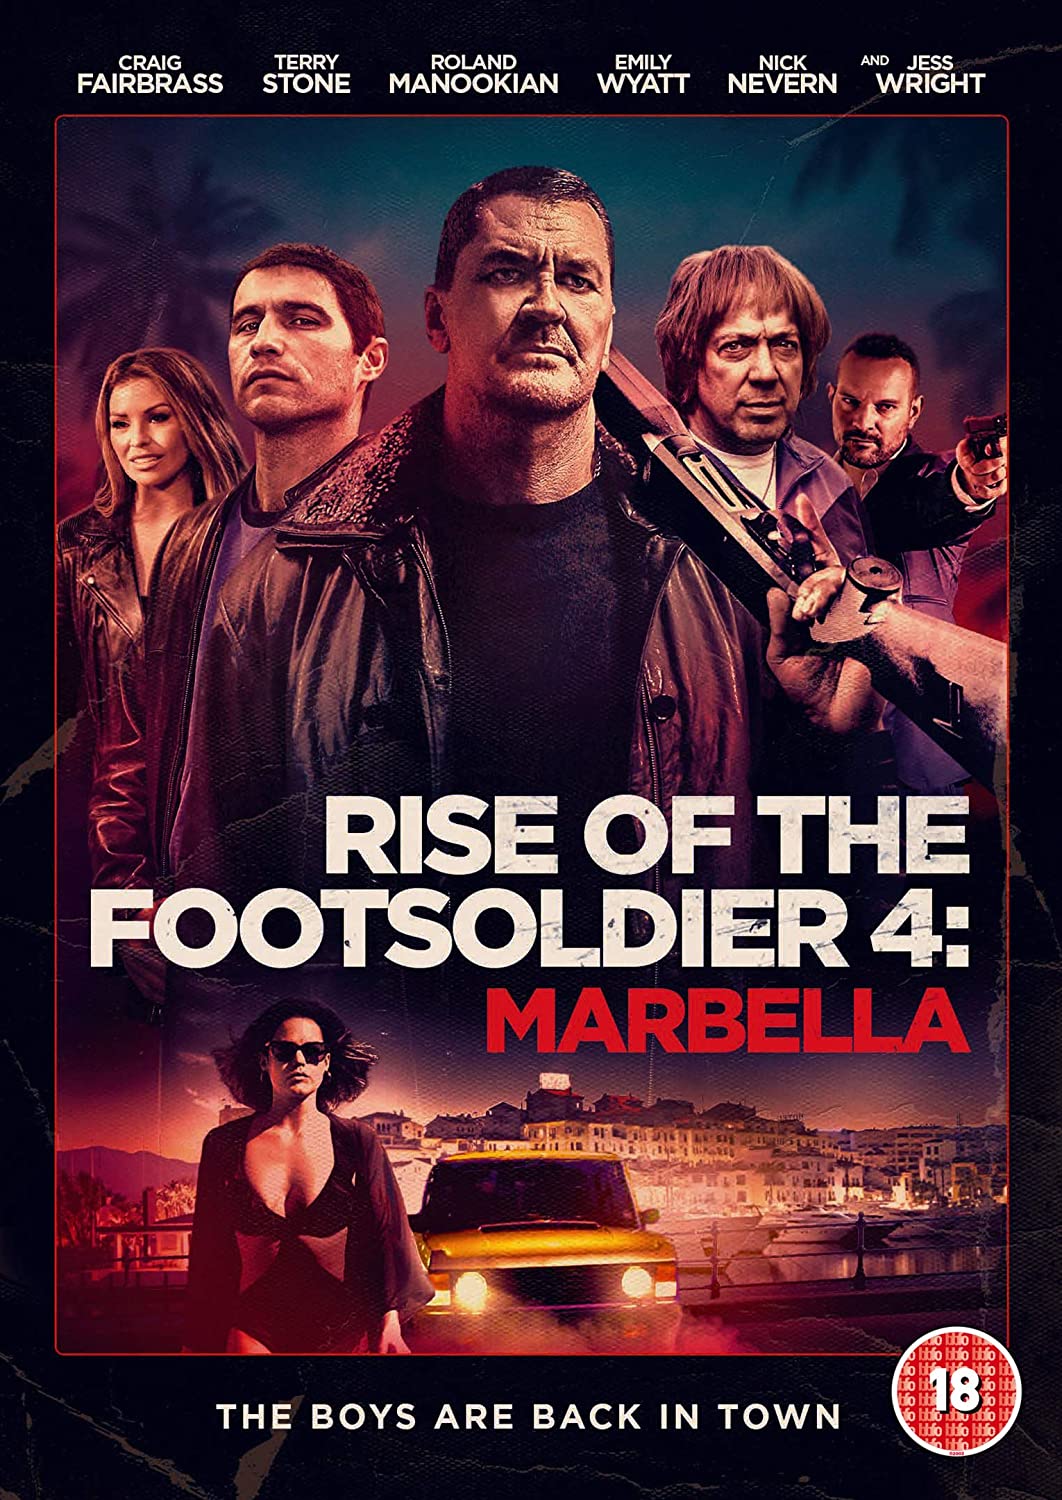 Rise of the Footsoldier 4: Marbella - Crime/Drama [DVD]